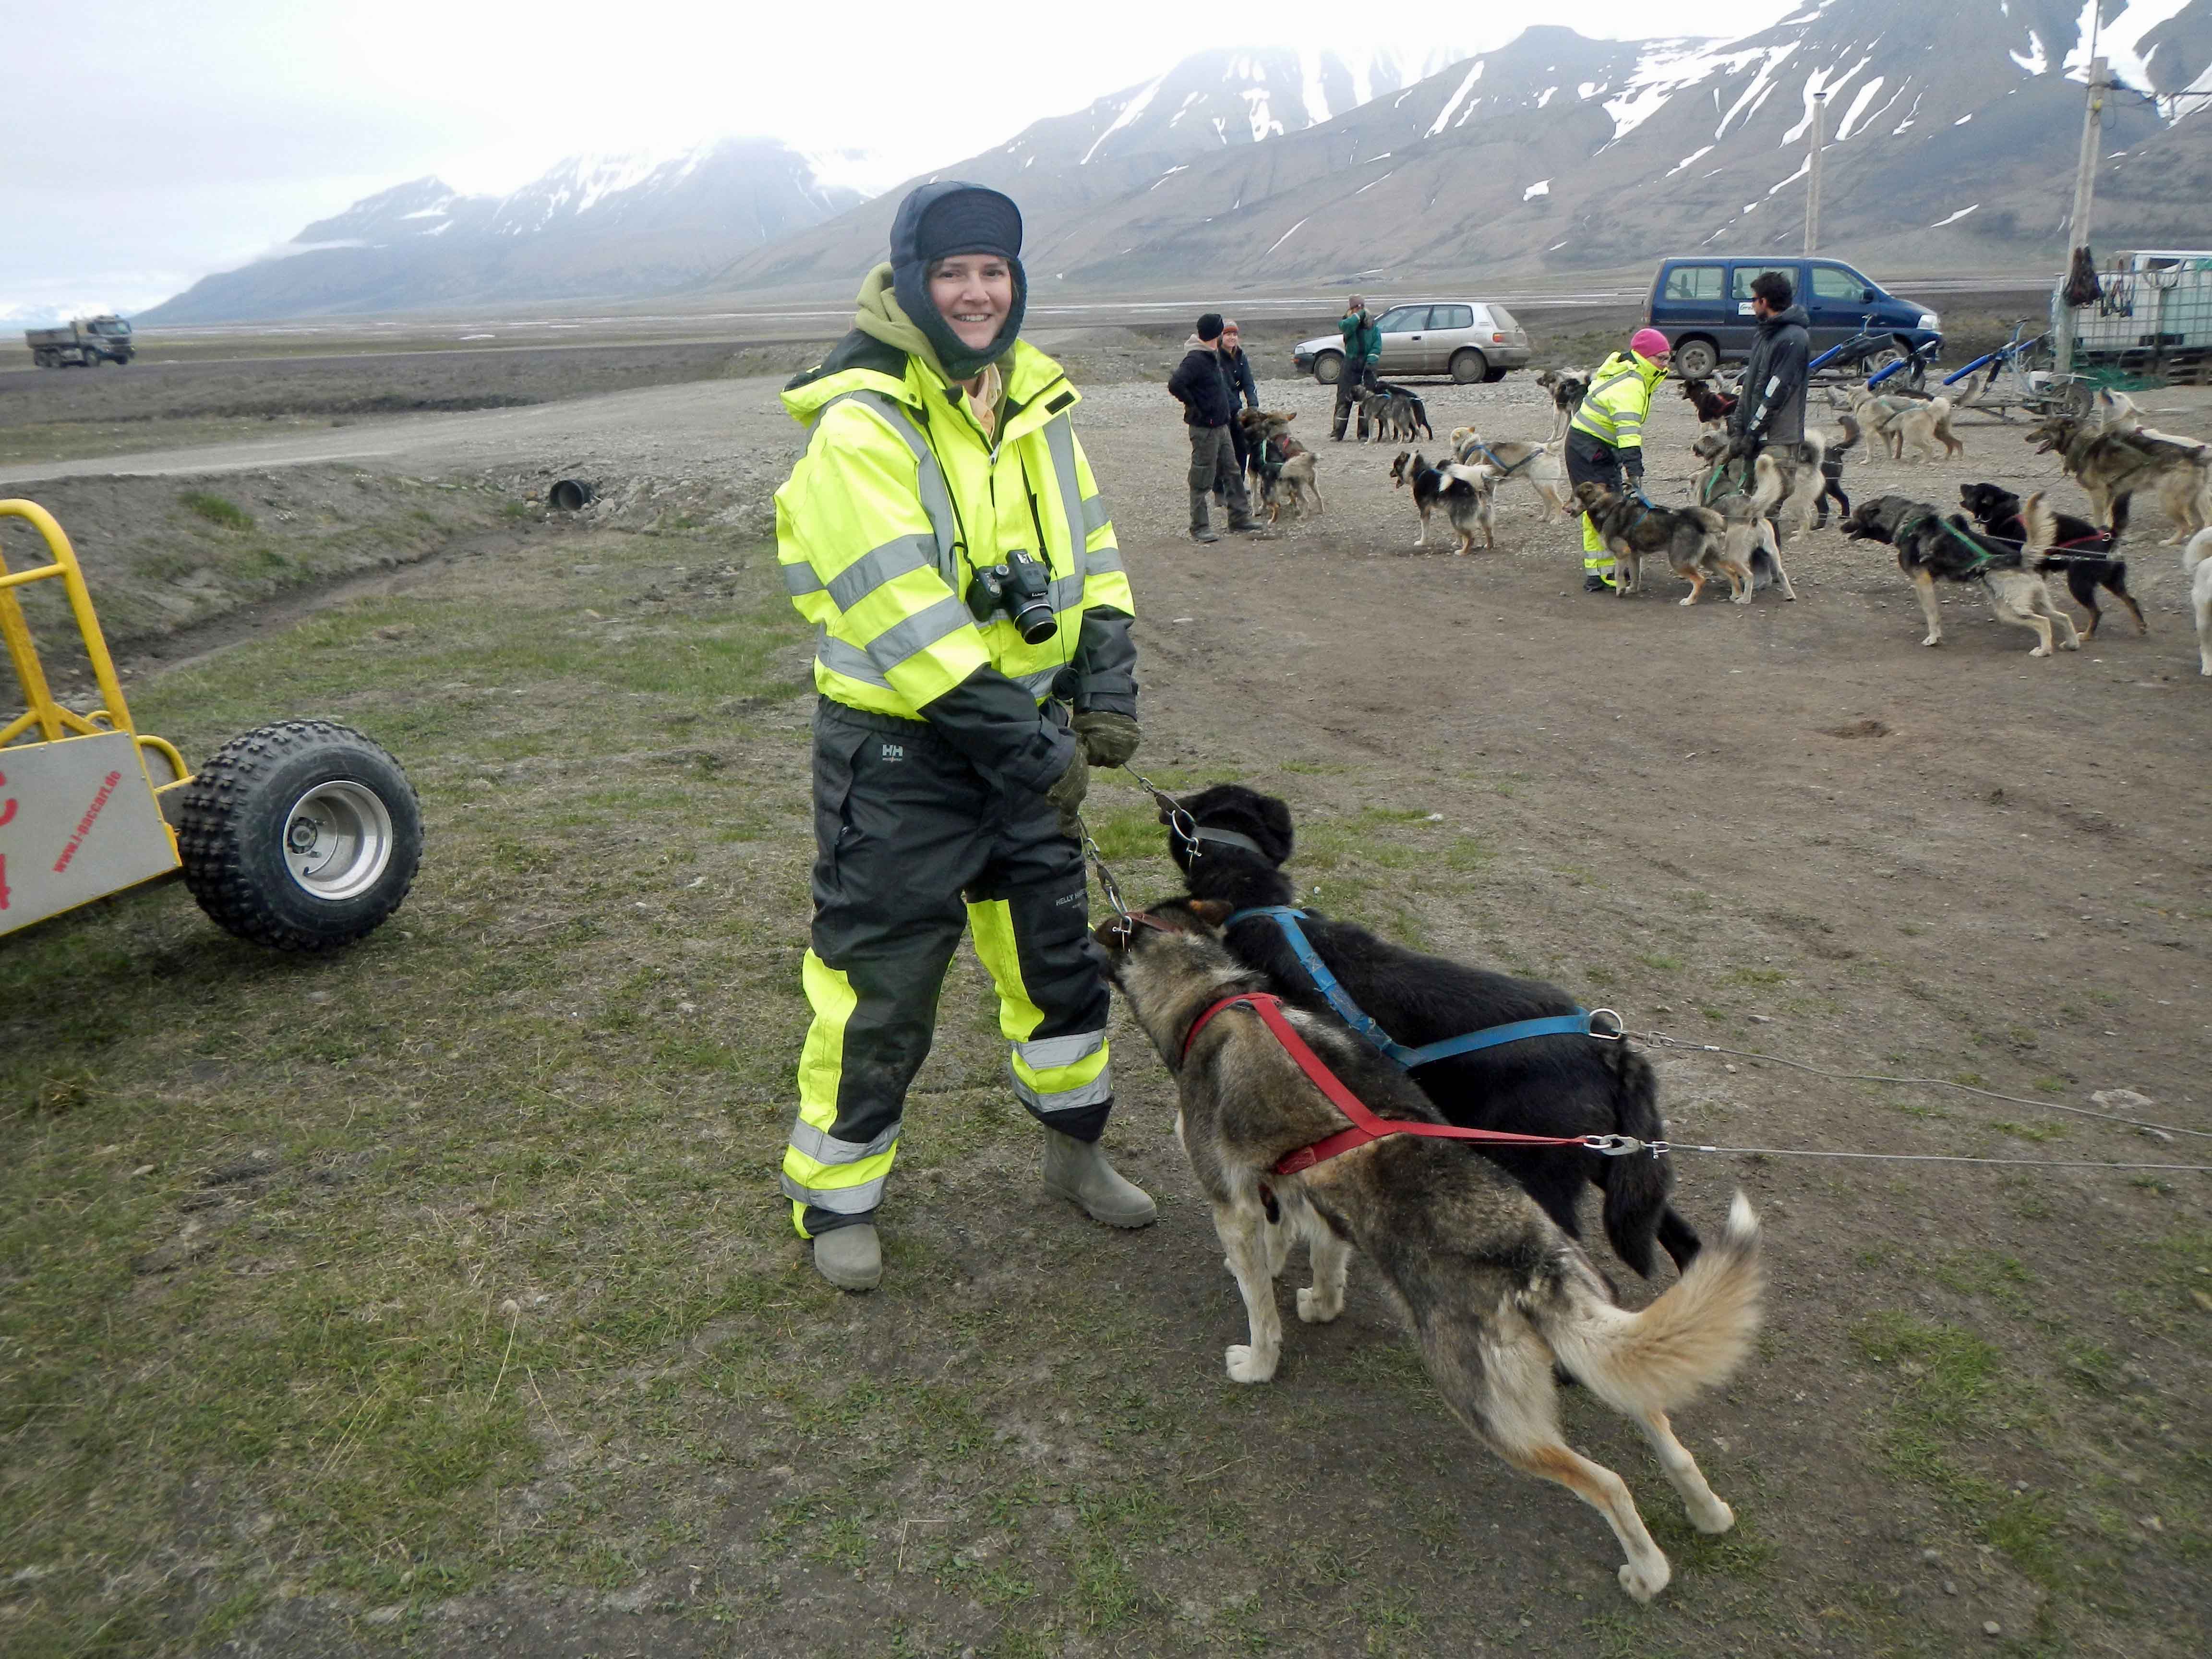 Holding onto the lead at Green Dog, Longyearbyen, Svalbard, Norway